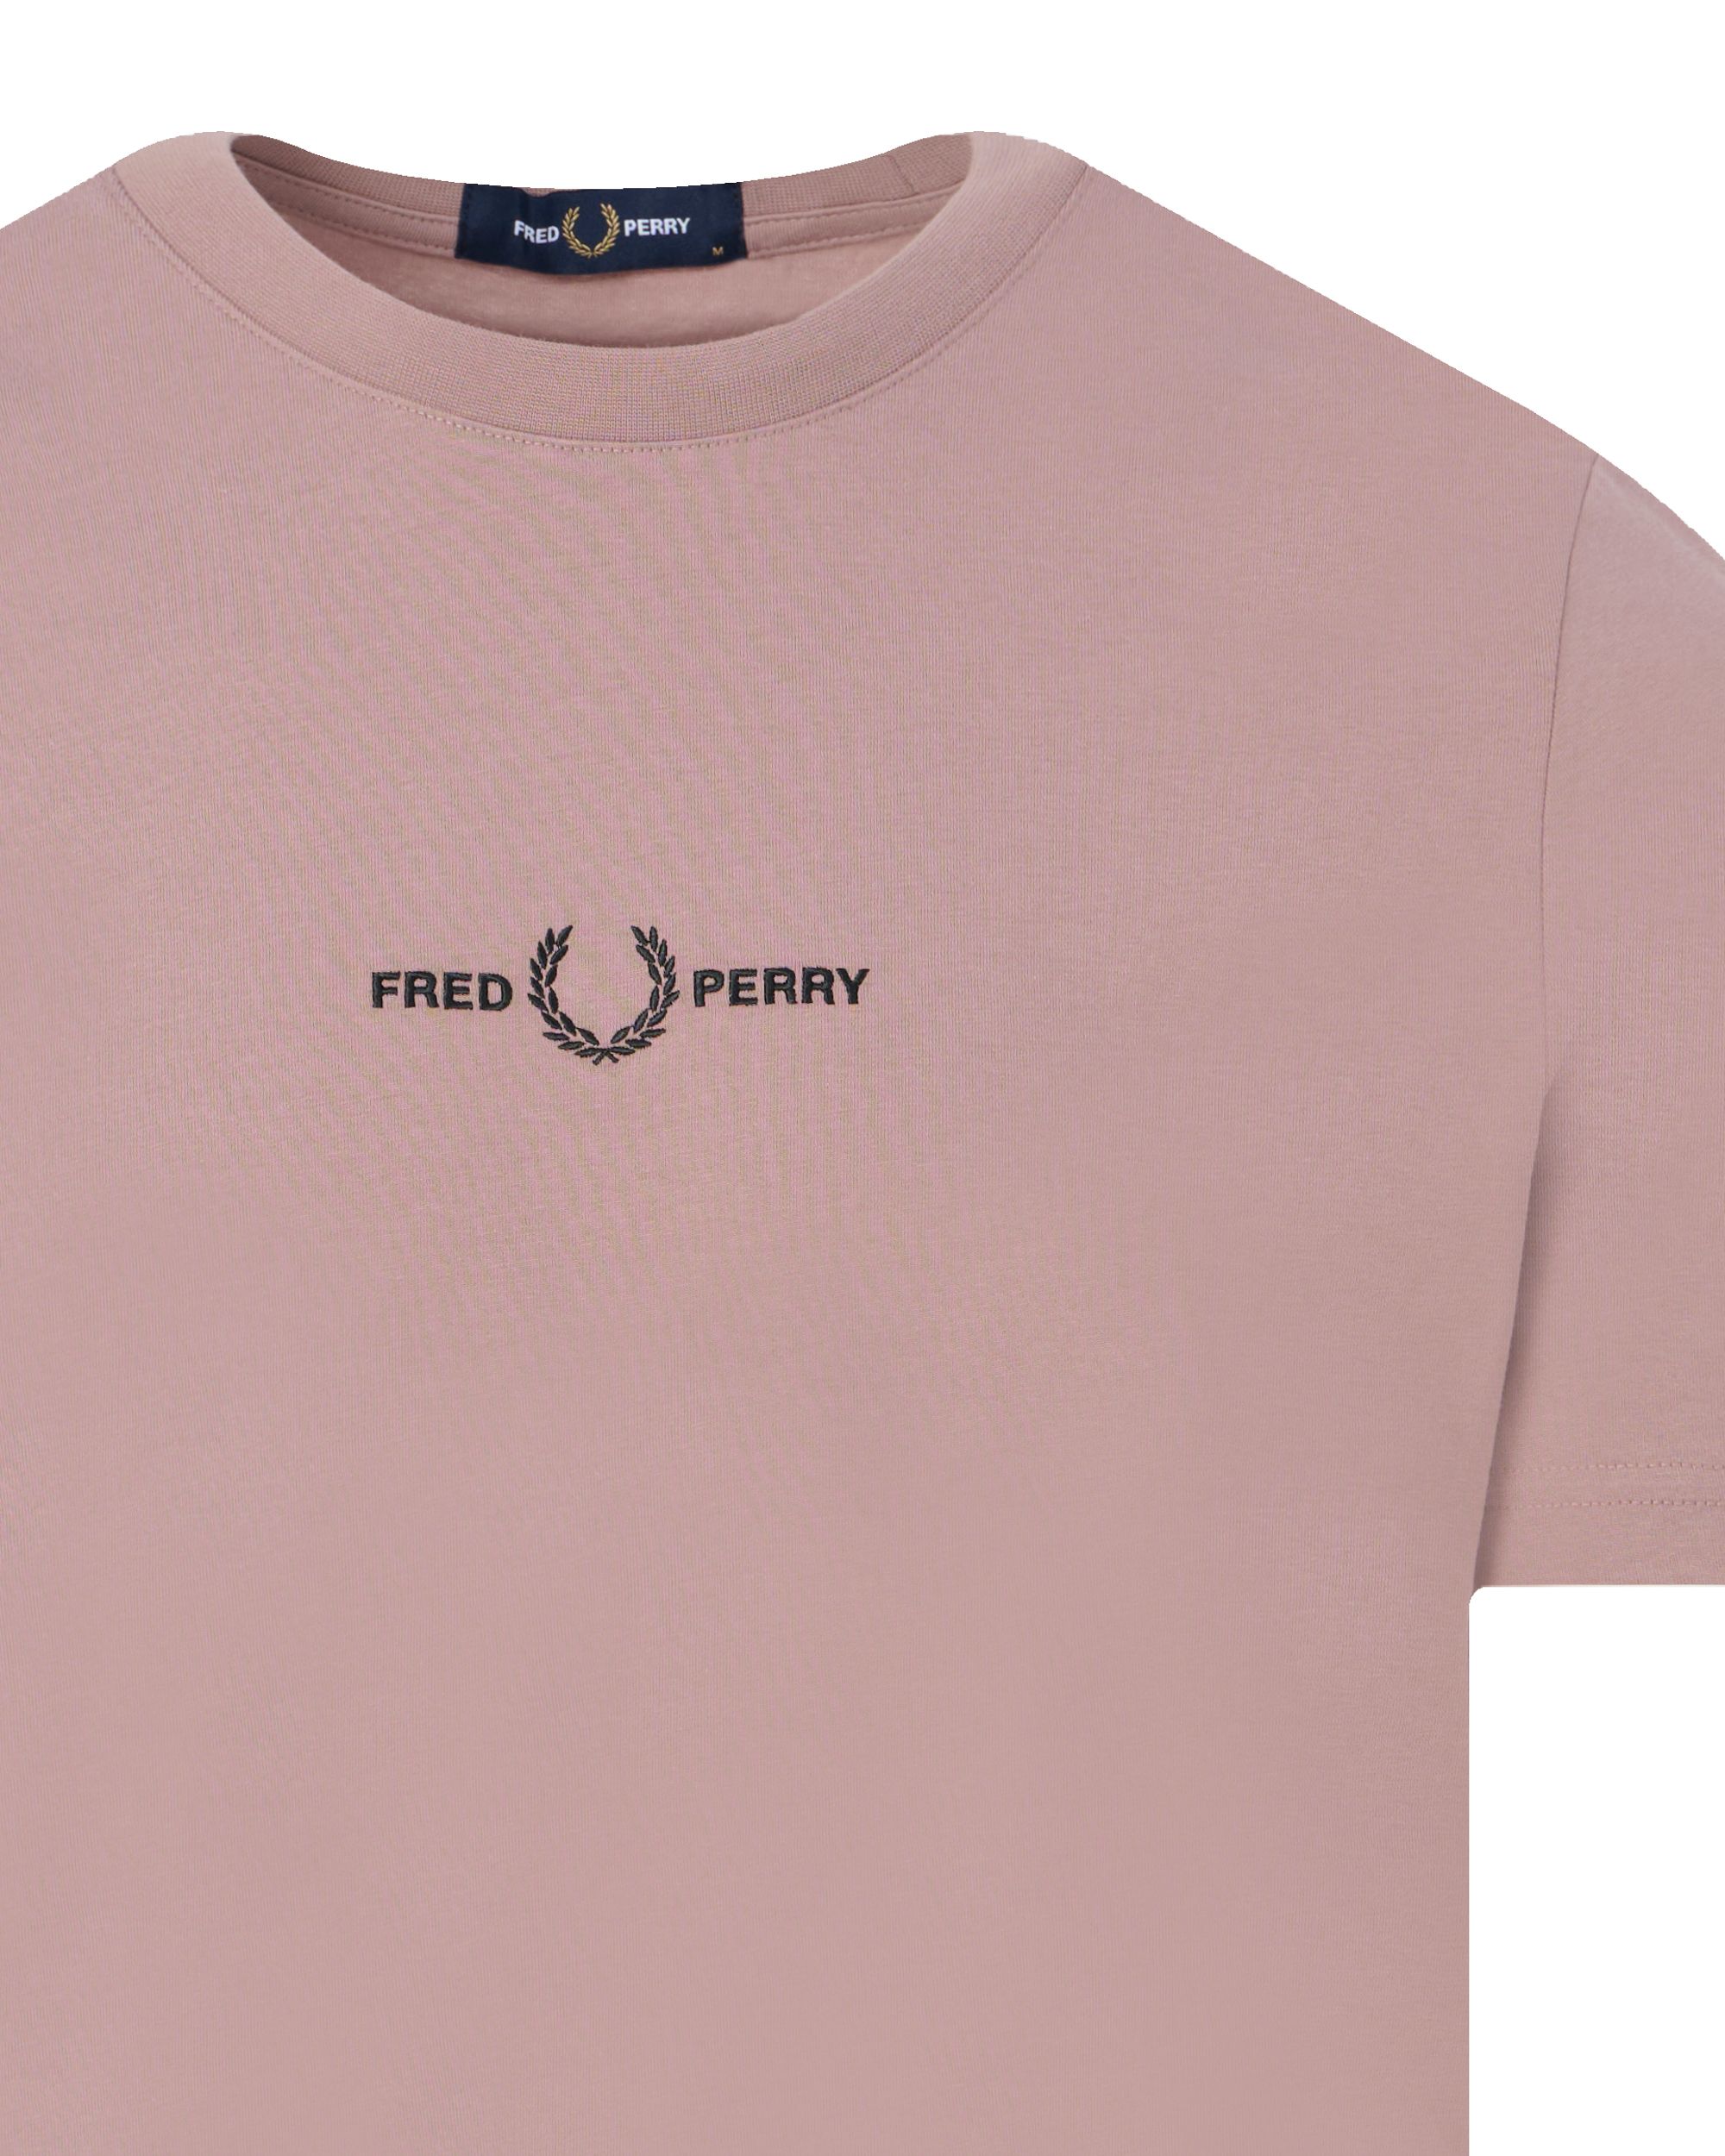 Fred Perry T-shirt KM Roze 091956-001-M